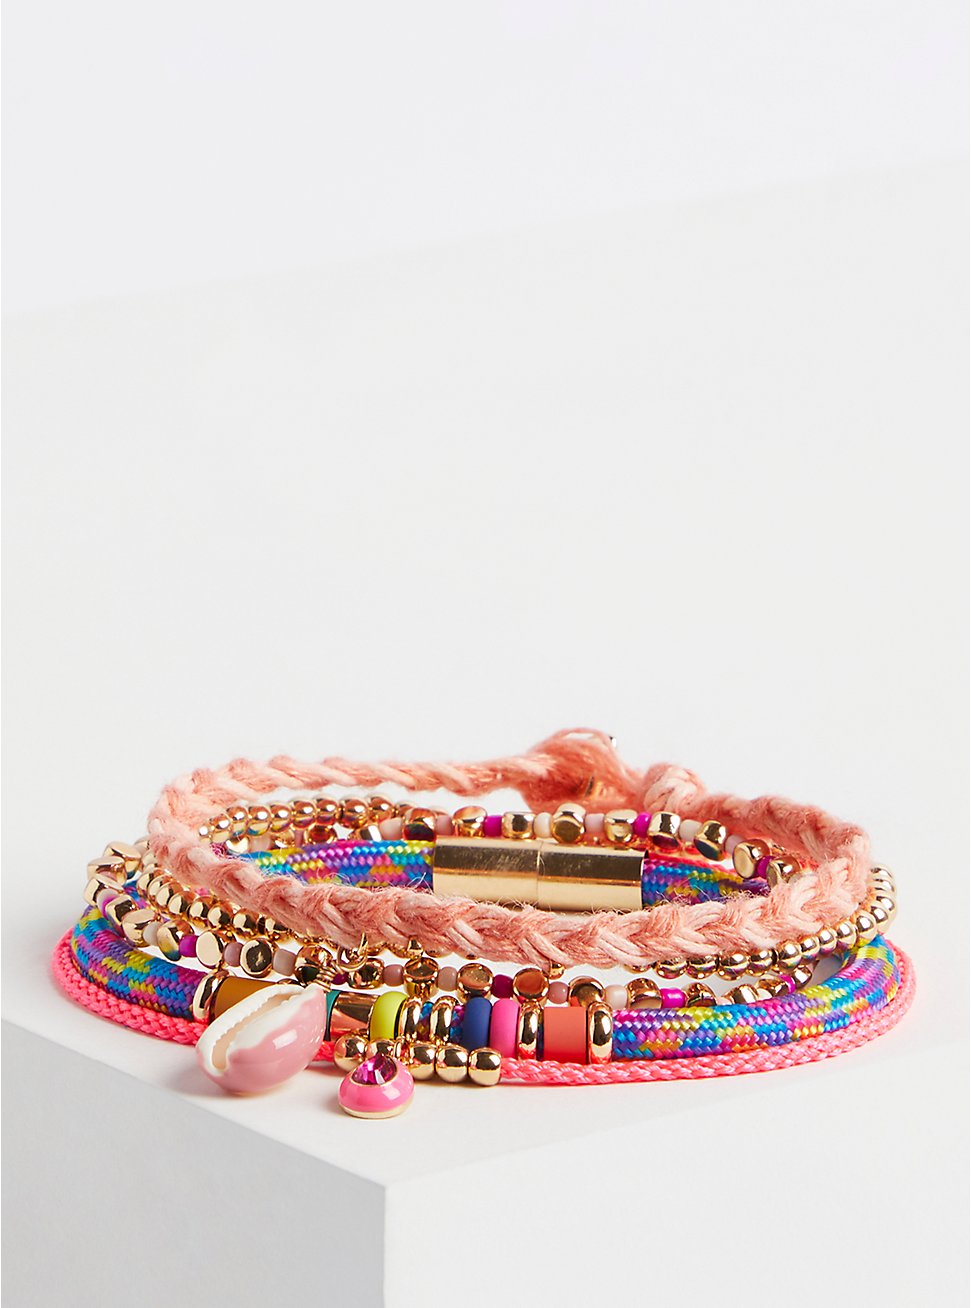 Multicolor Bead and Cord Bracelets Set of 4 - Gold Tone, MULTI, hi-res